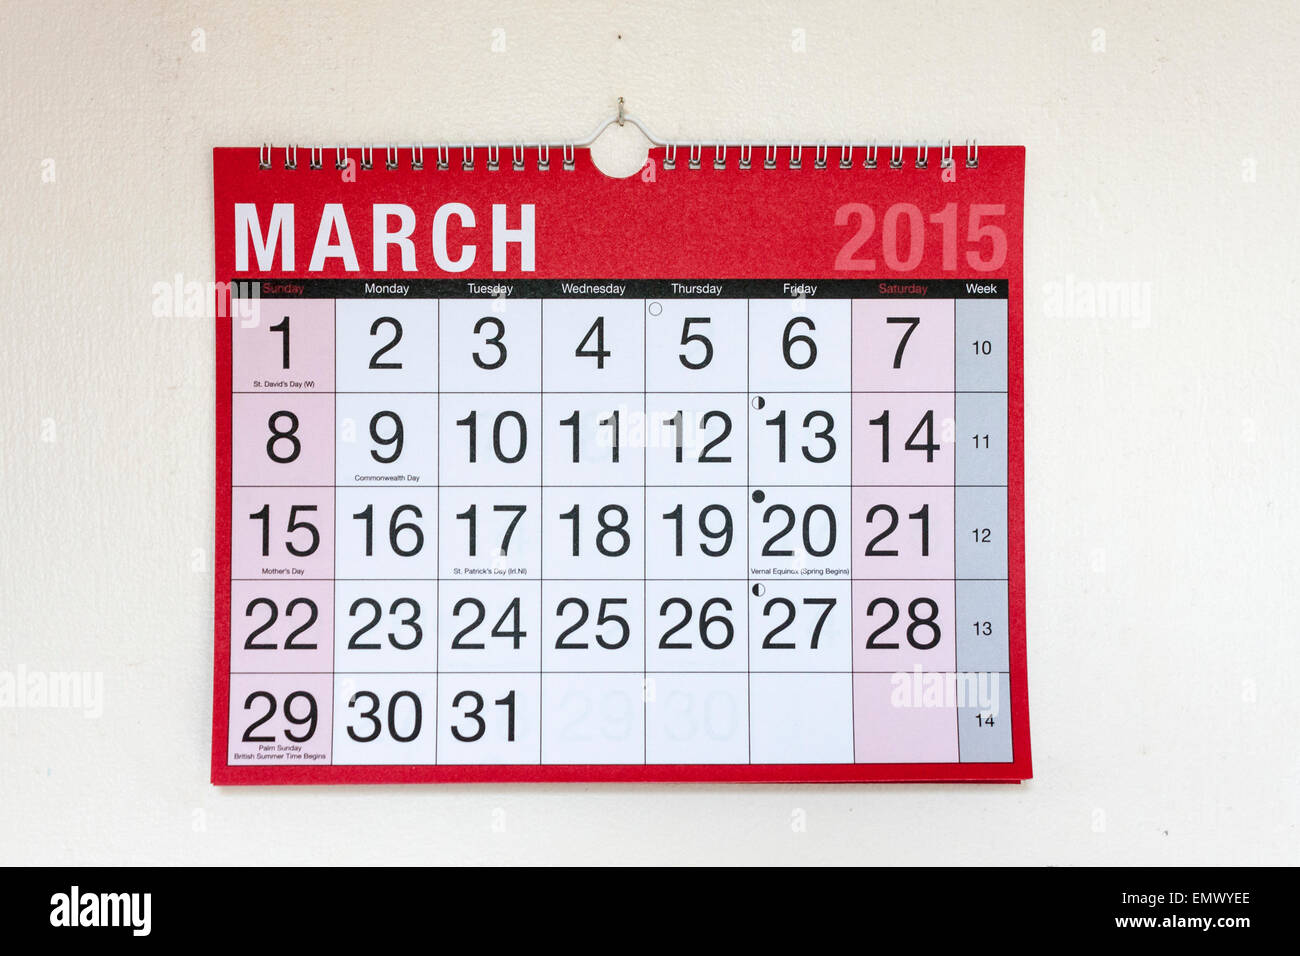 Wall calendar for month of March 2015 Stock Photo